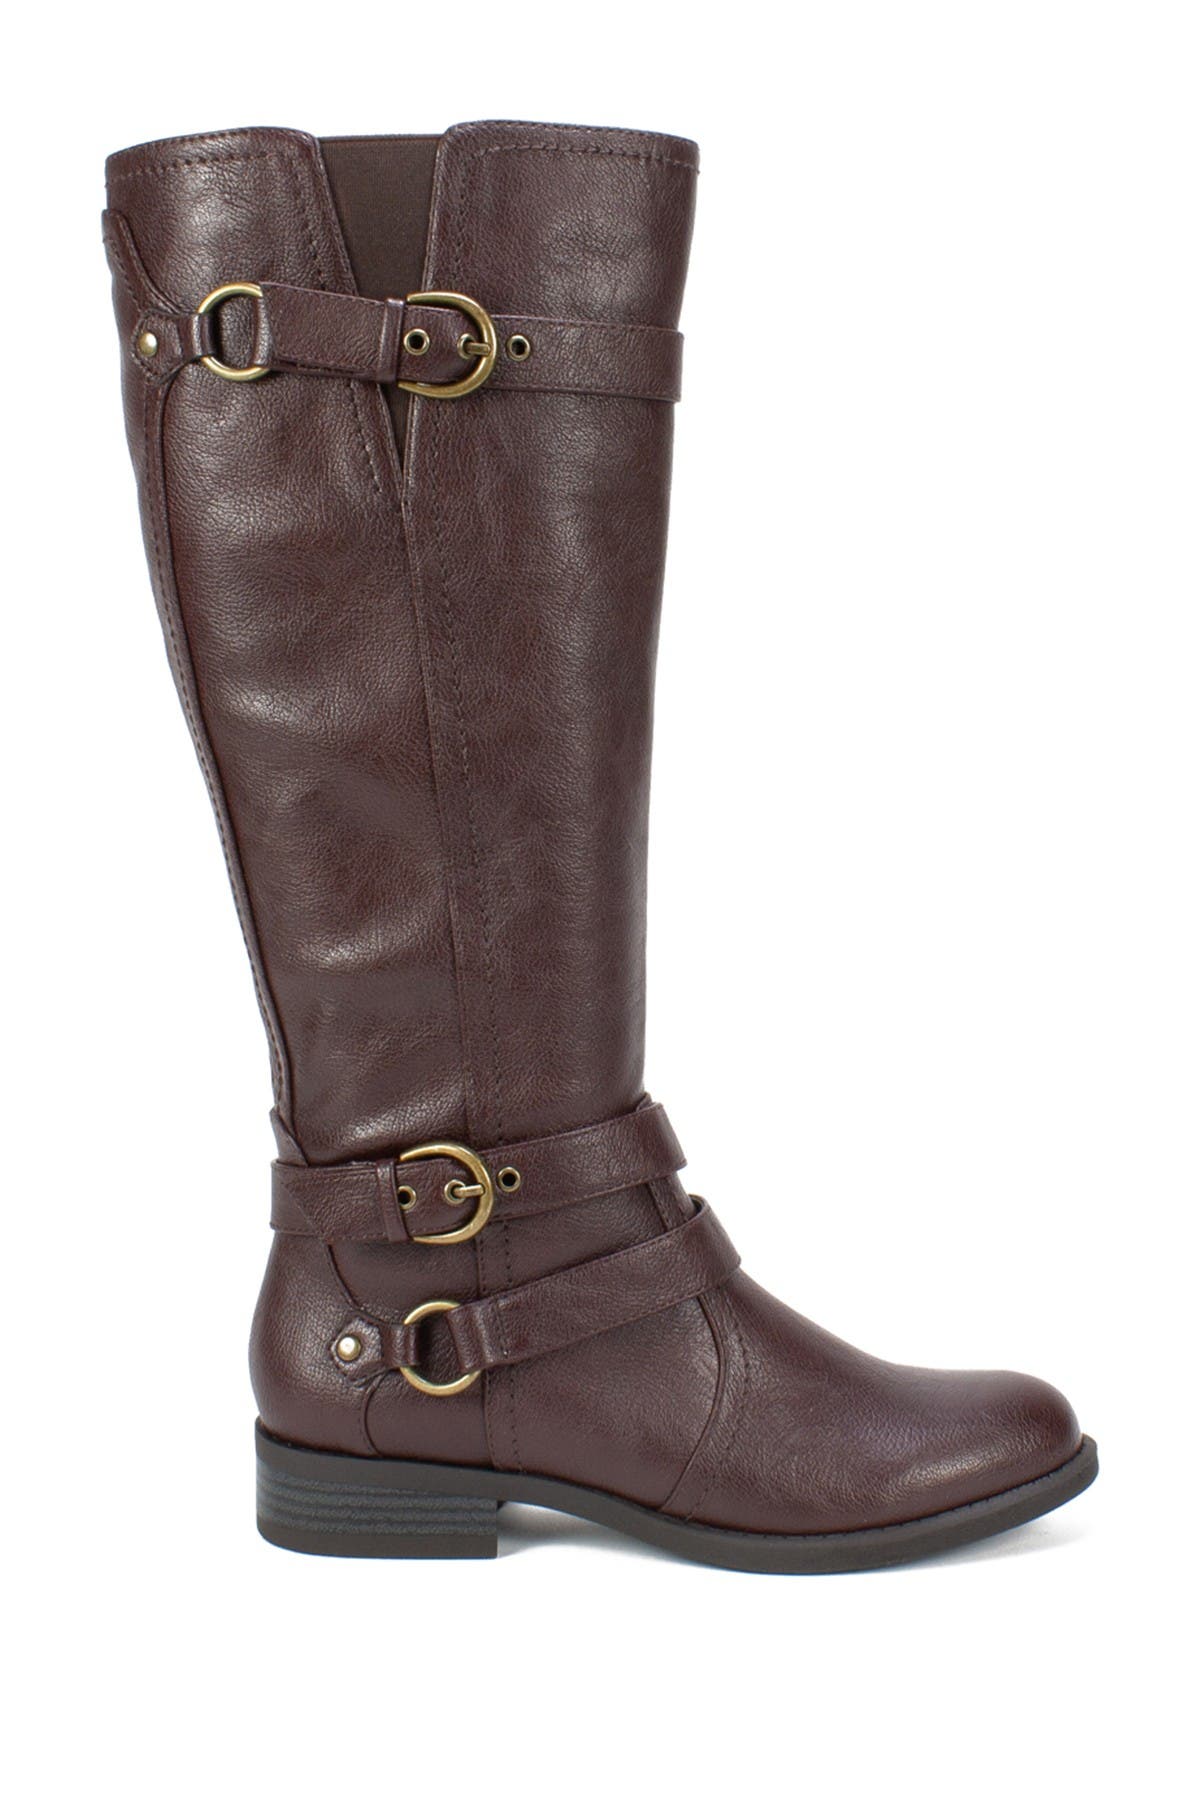 wide calf tall riding boots